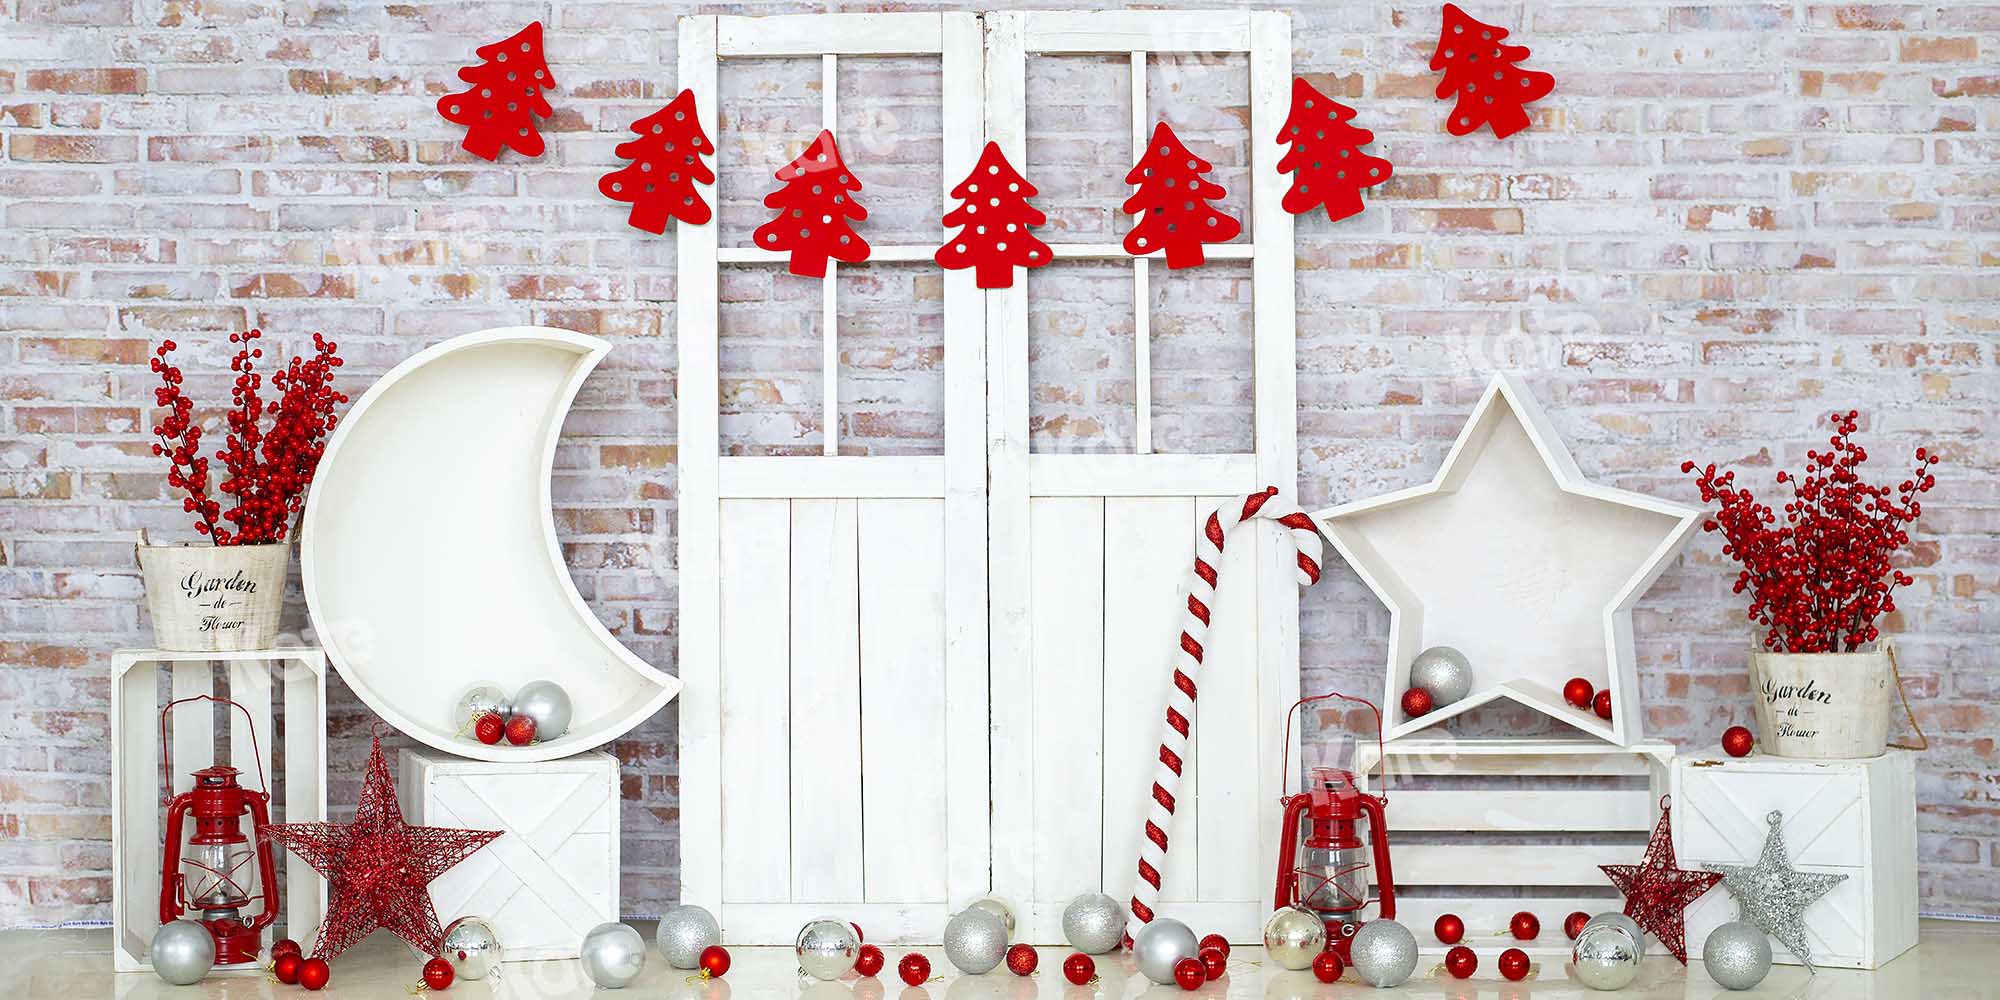 Kate Christmas Red Tree Barn Door White Brick Wall Backdrop Designed by Emetselch